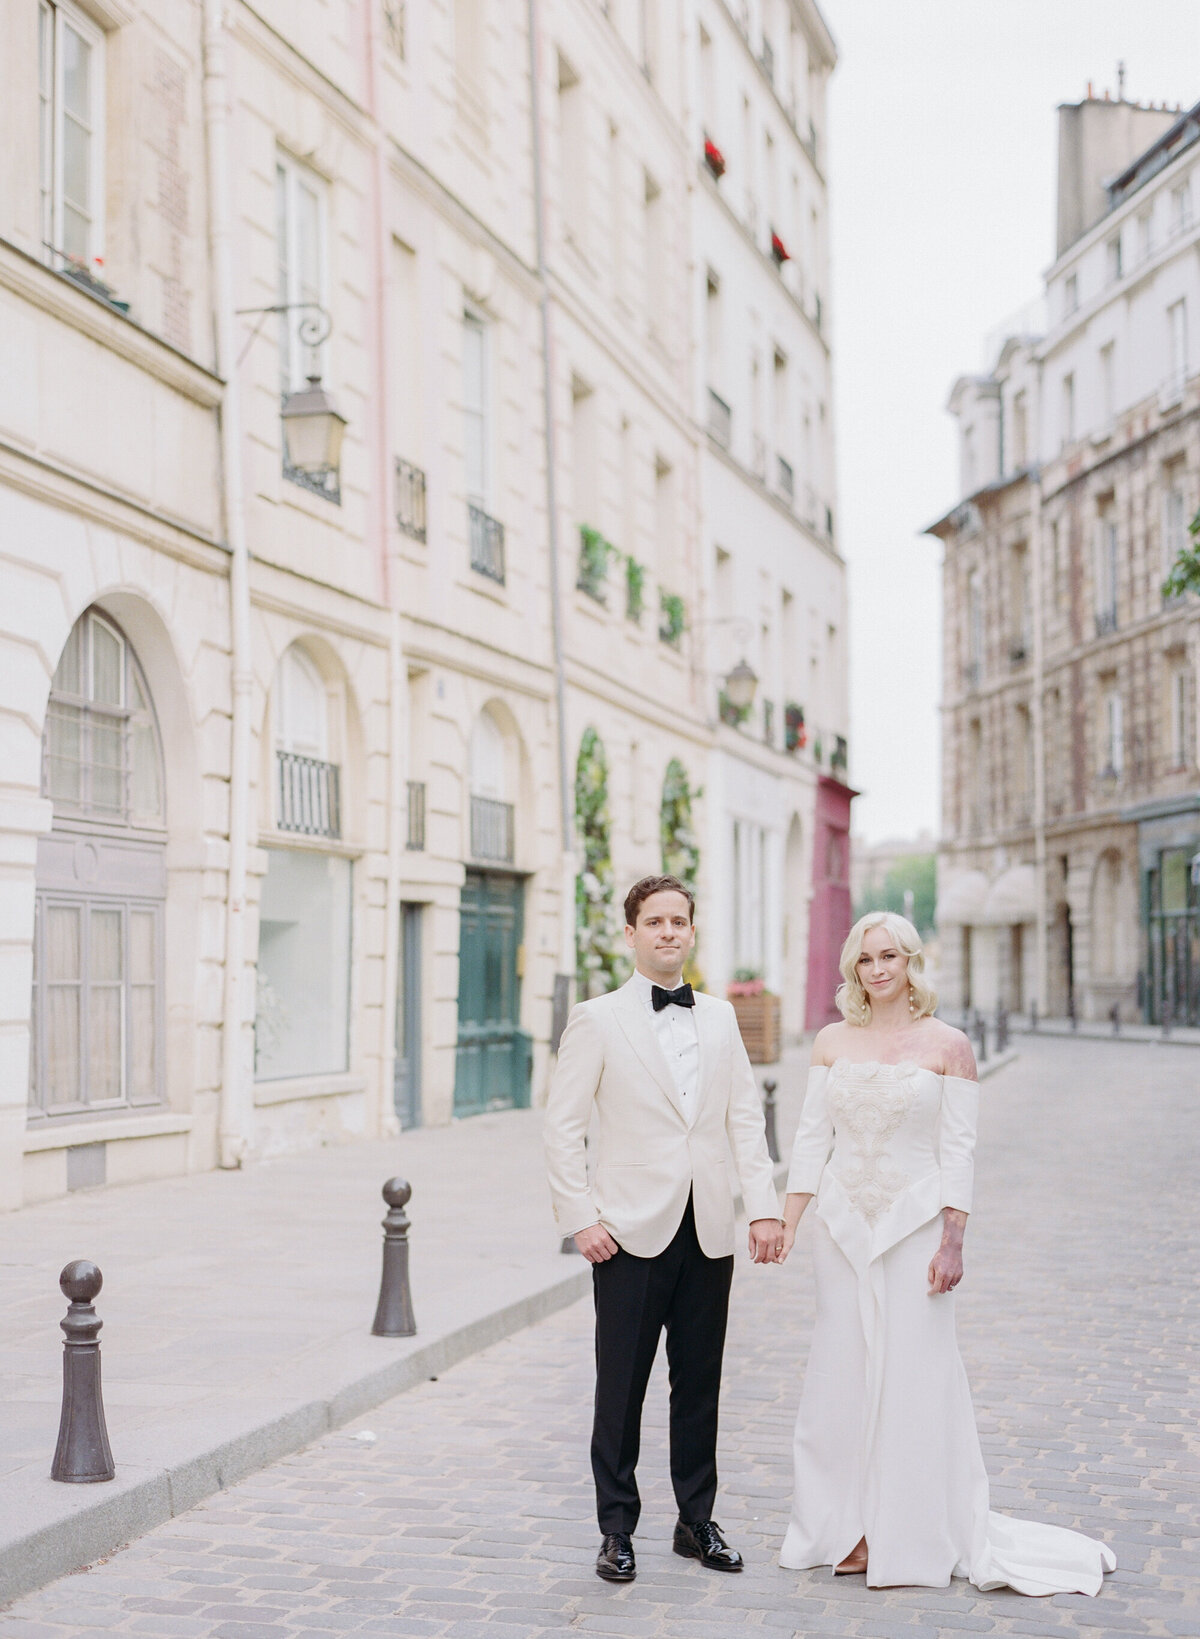 Jennifer Fox Weddings English speaking wedding planning & design agency in France crafting refined and bespoke weddings and celebrations Provence, Paris and destination Laurel-Chris-Chateau-de-Champlatreaux-Molly-Carr-Photography-7